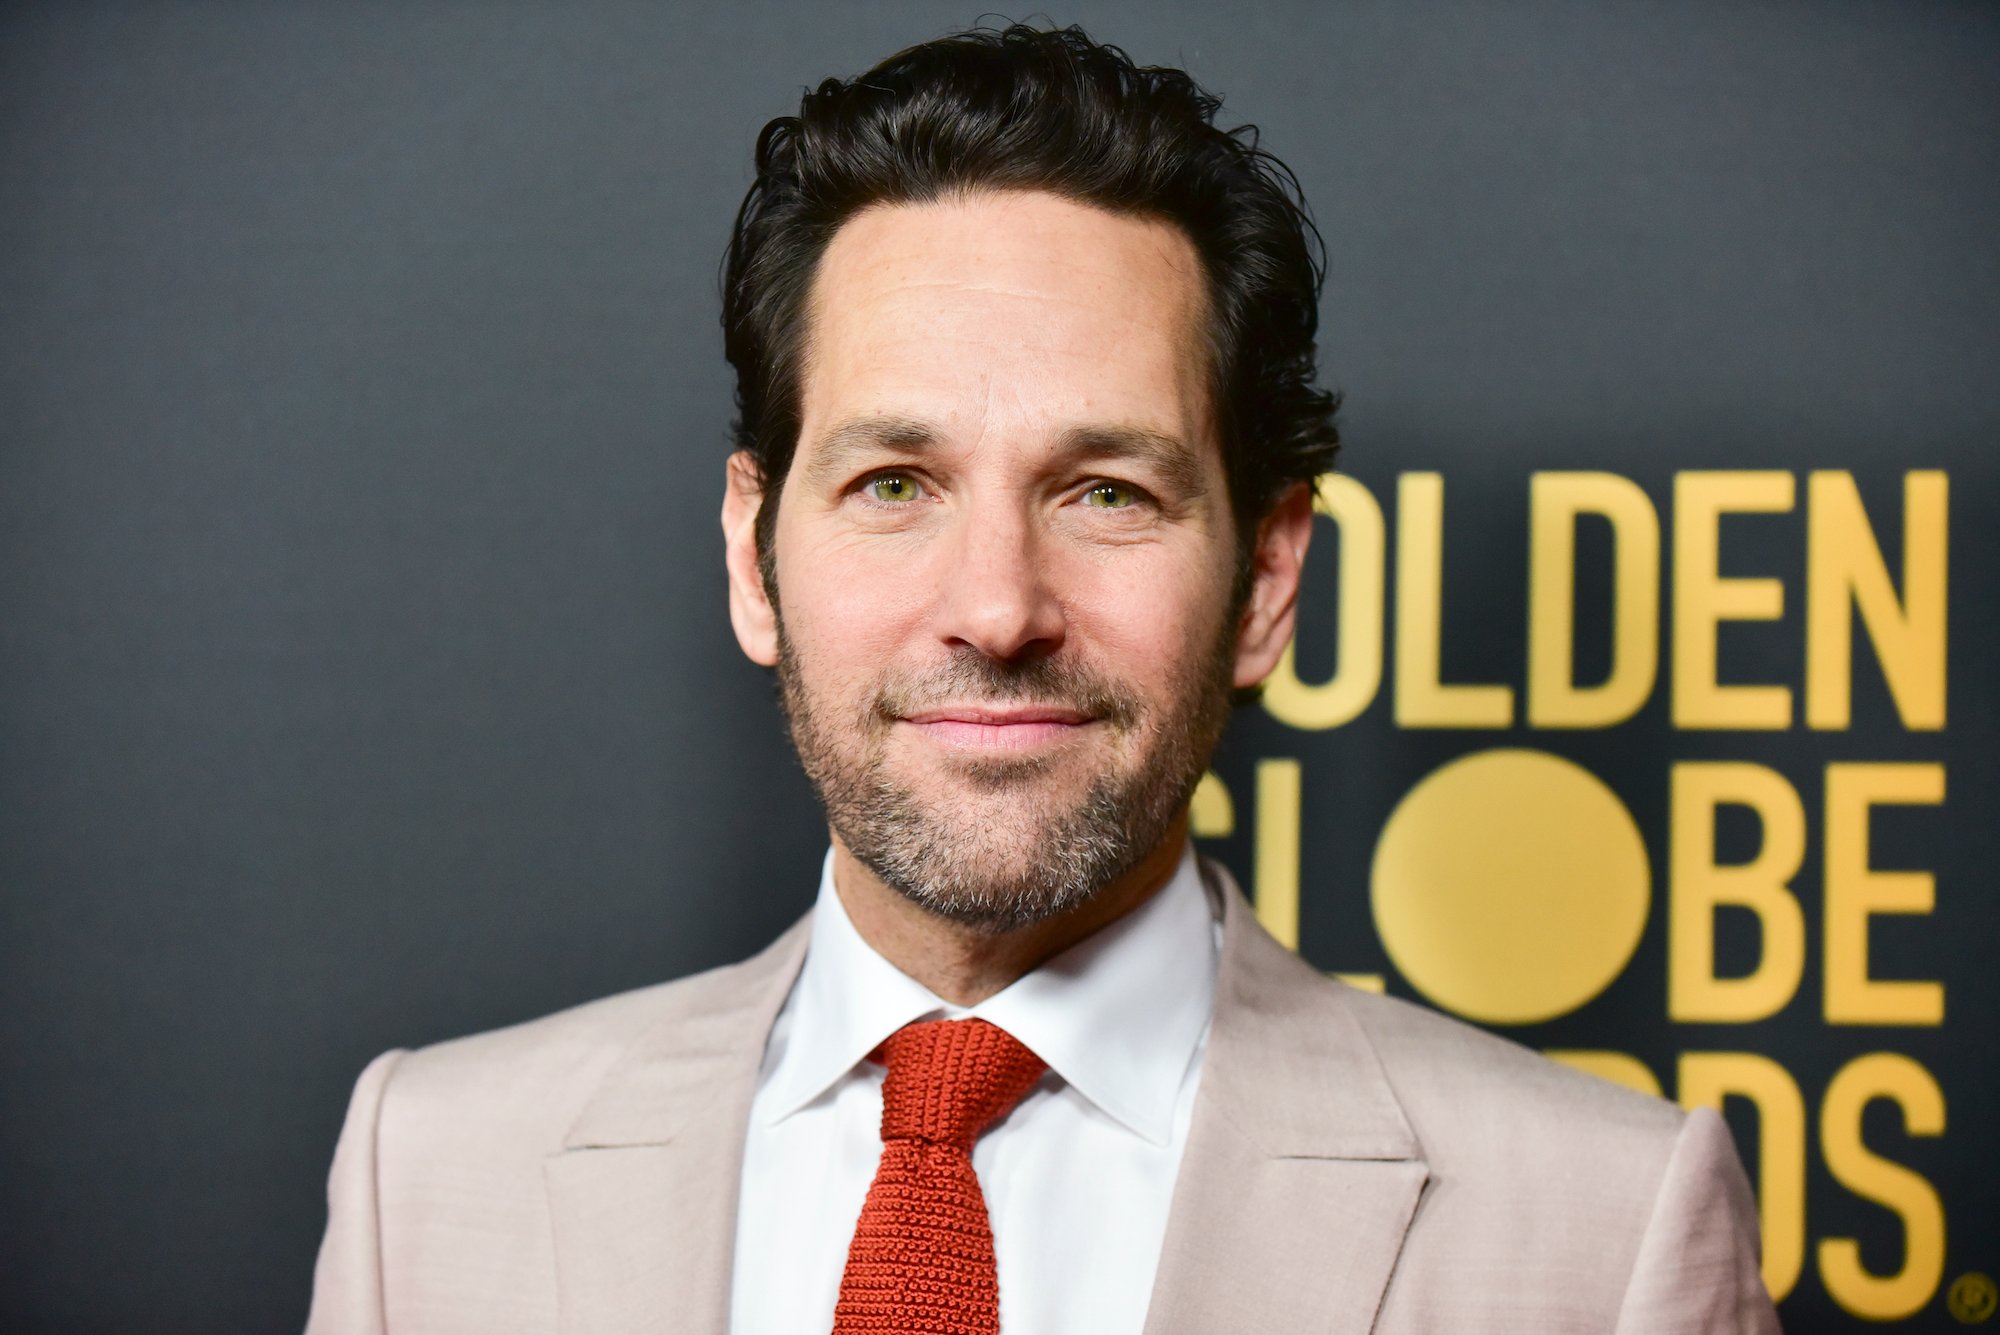 Marvel Star Paul Rudd Got 'Friends' Role After Casting Director Wrote